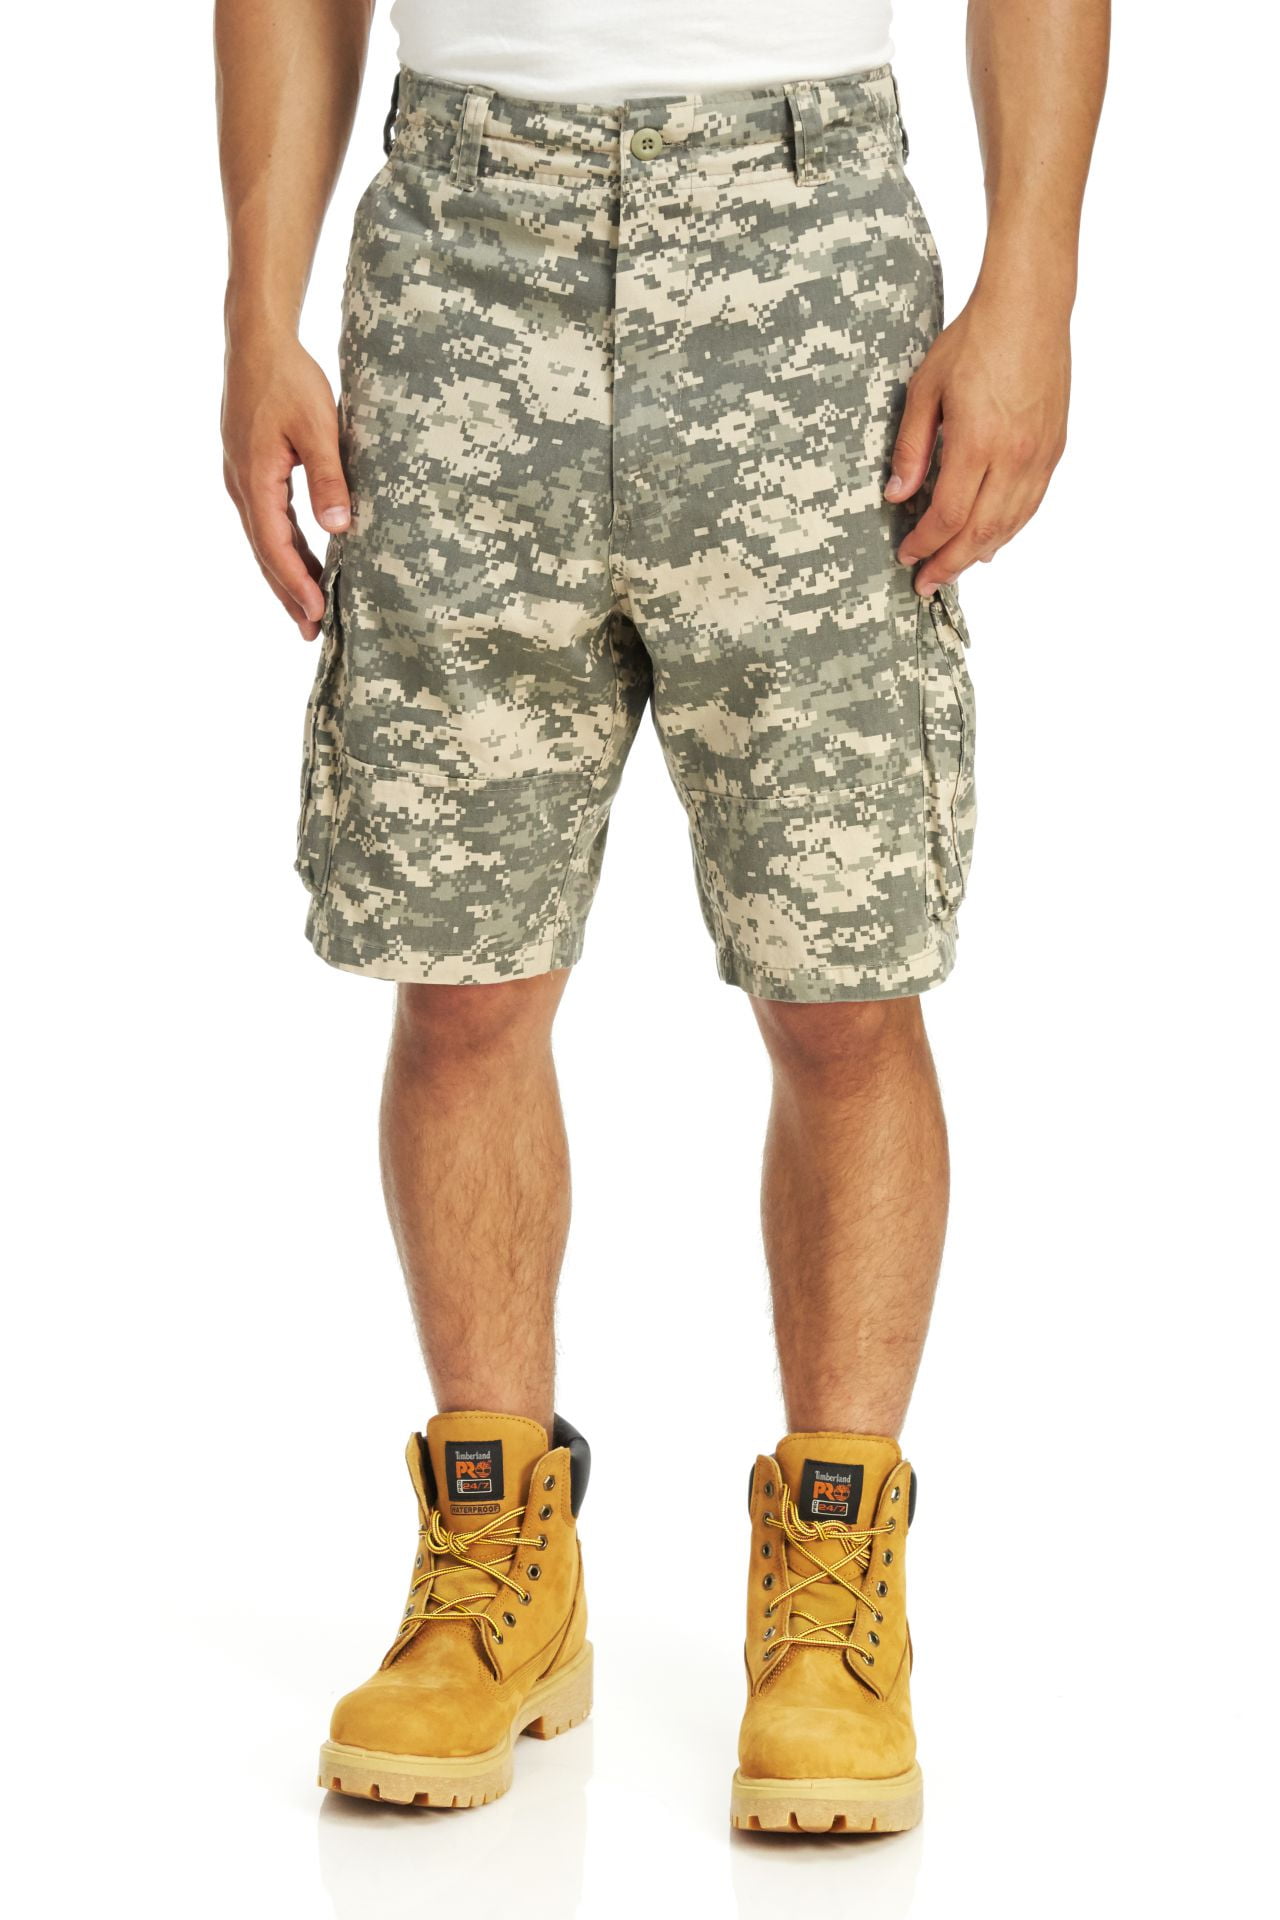 Buy > under armour combat shorts > in stock